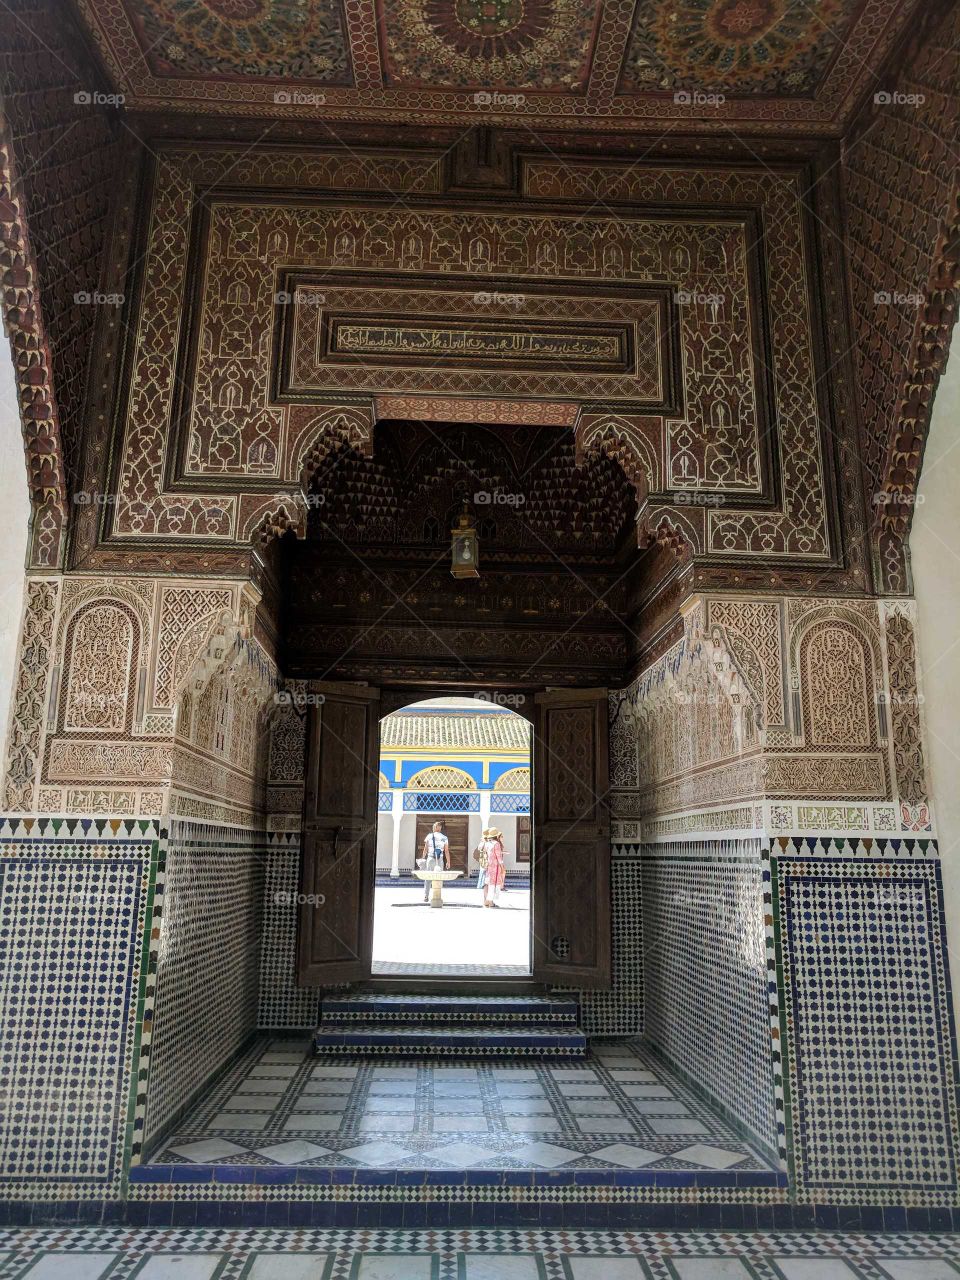 Gorgeous Ornate Ceramic Tile Mosaic Entrance (Doorway) Looking Out Over a Courtyard and Two People in the Bahia Palace in Marrakech in Morocco